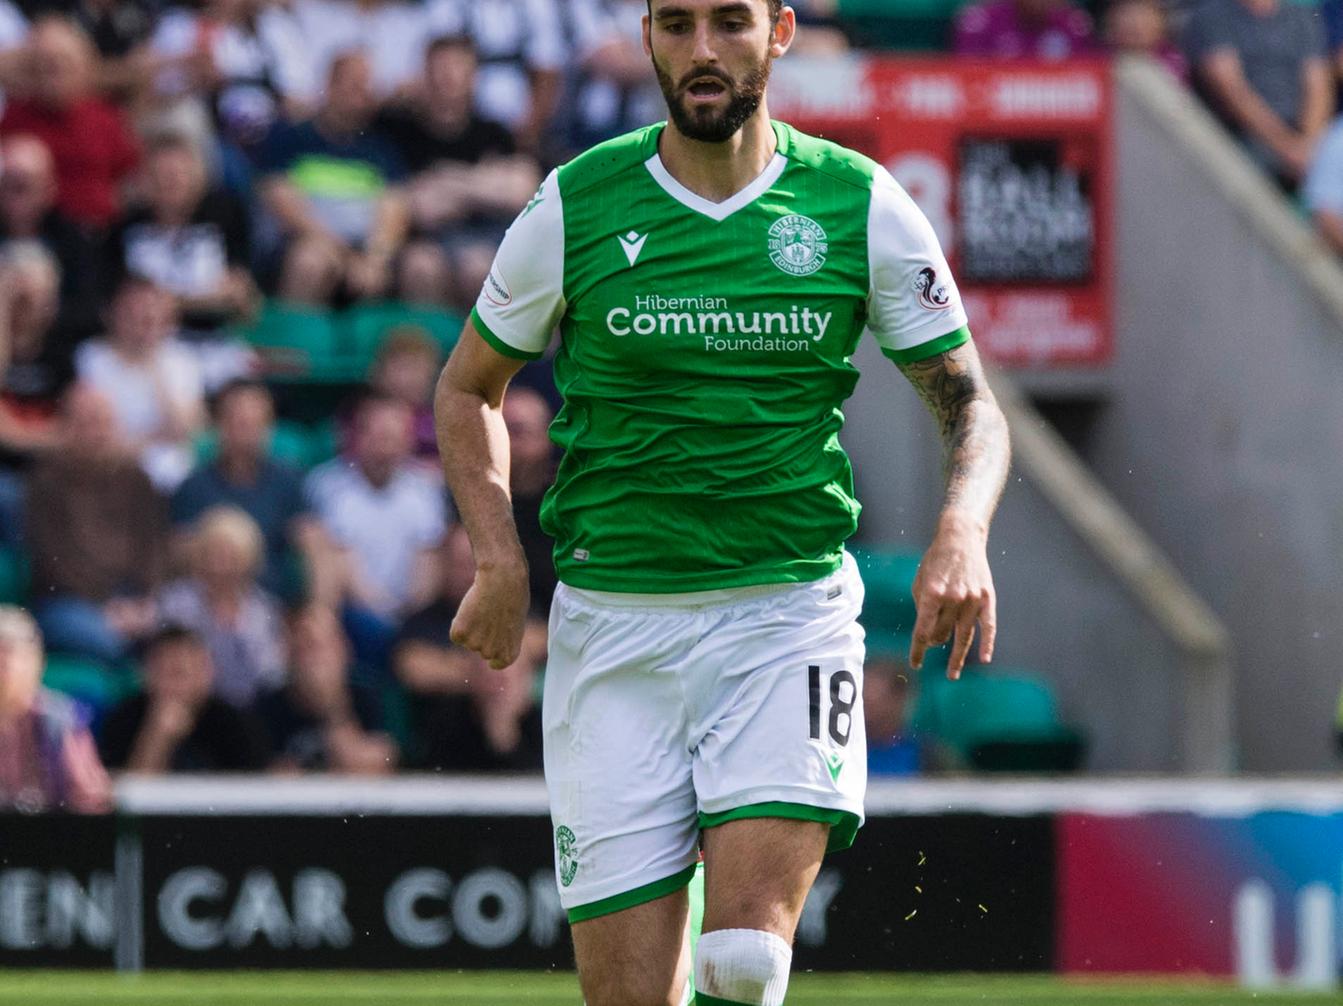 Replaced Allan for last three minutes as Hibs switched to three at the back.